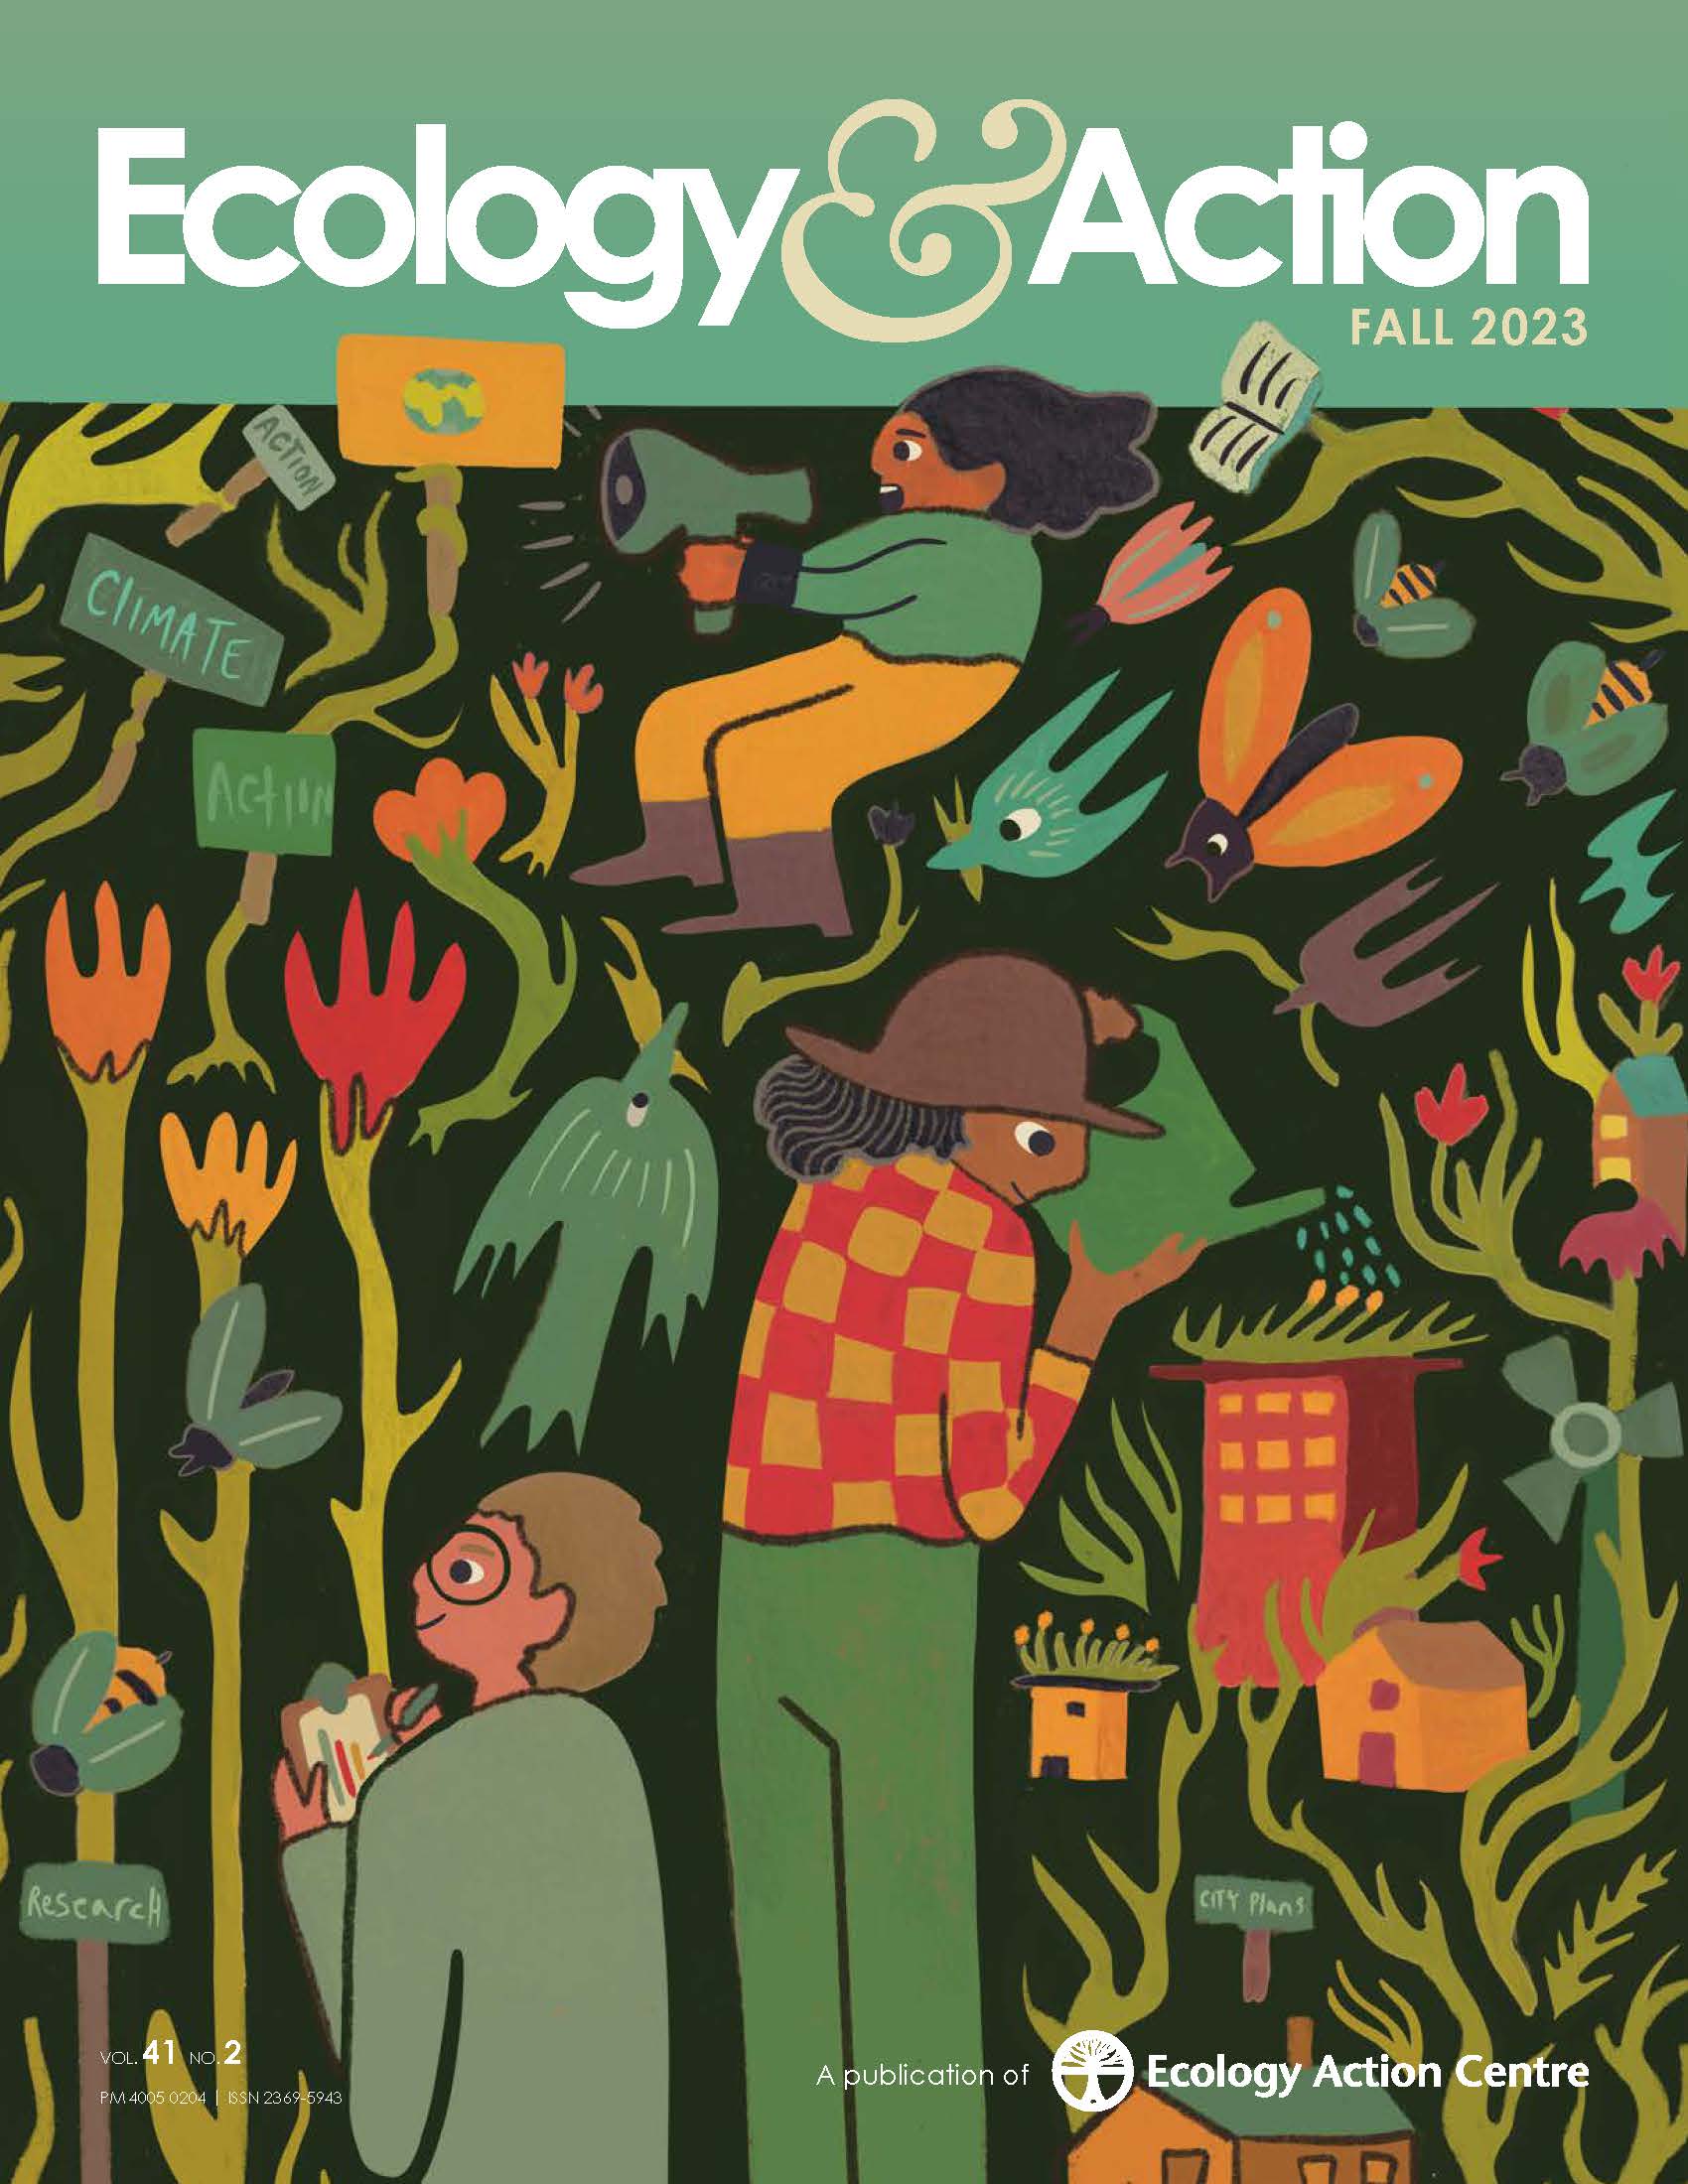 the cover of the fall 2023 issue of Ecology & Action magazine